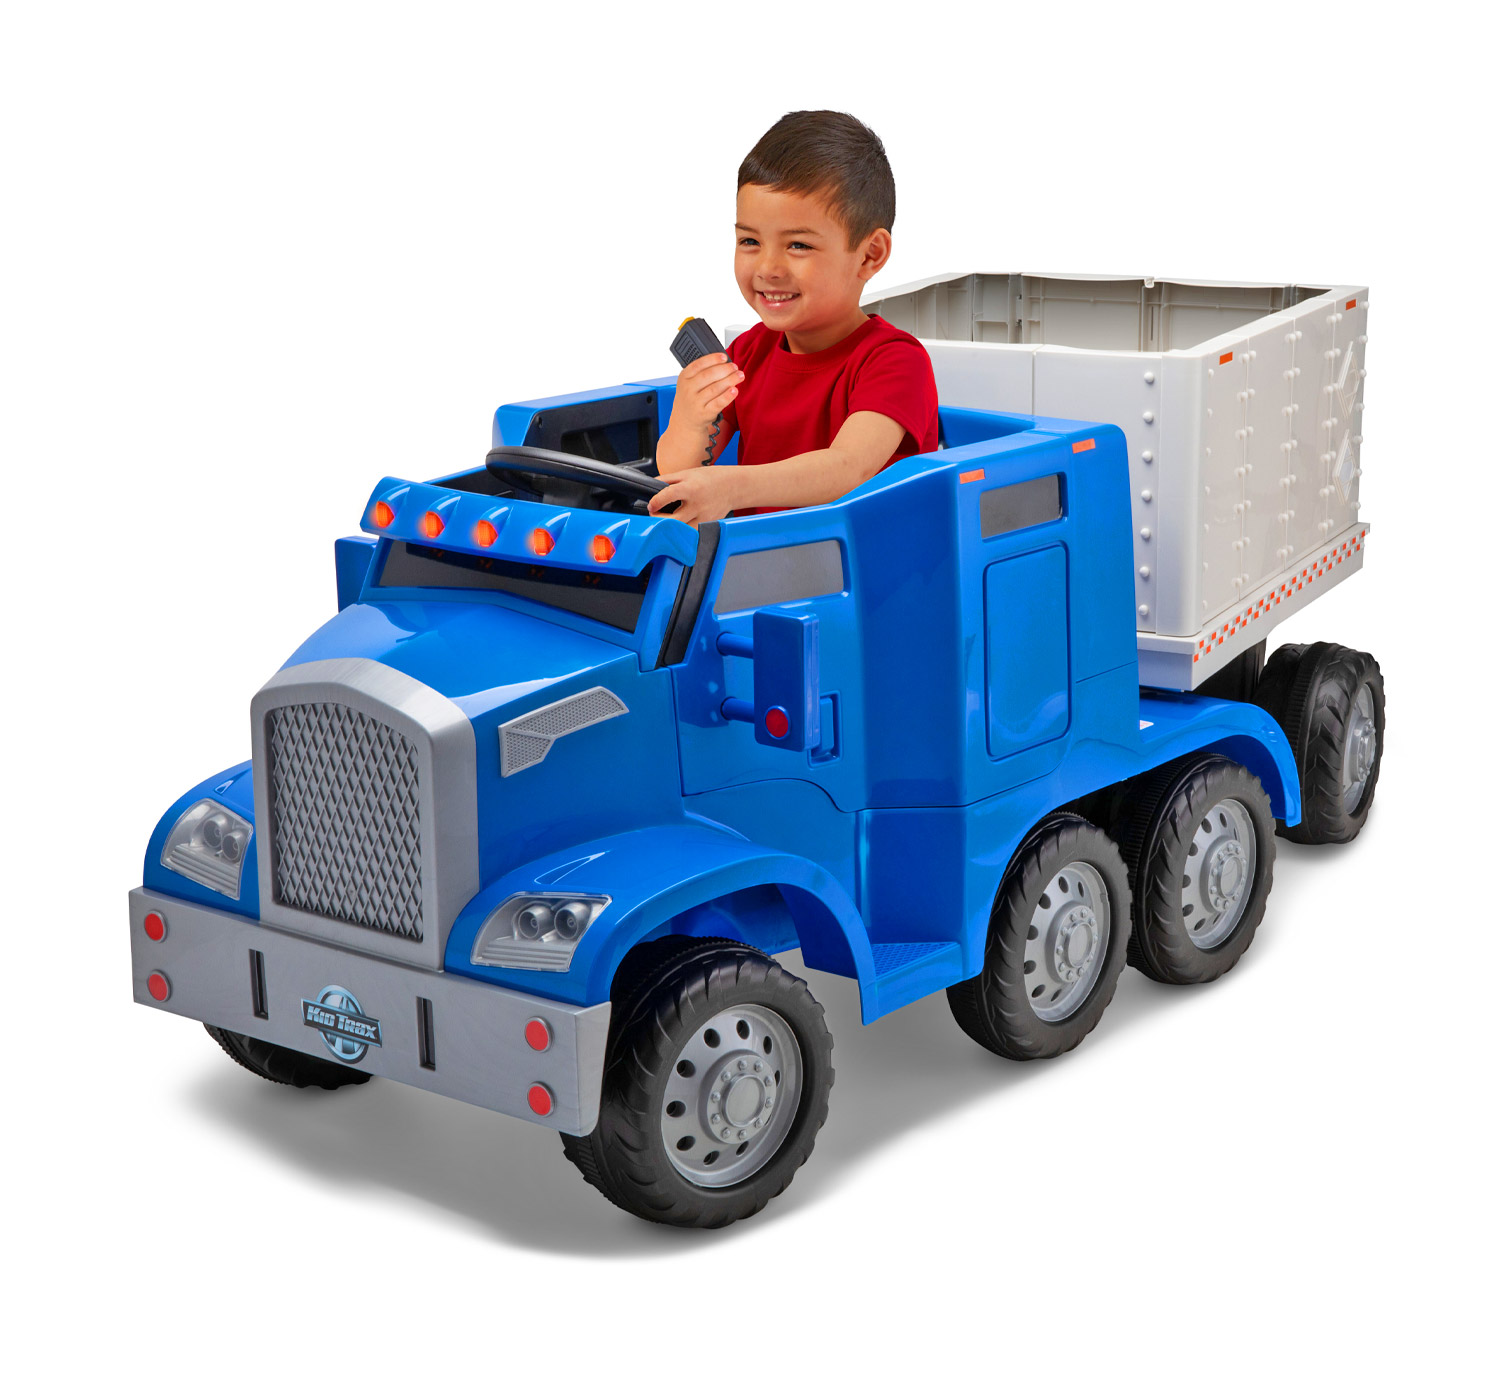 sit on truck toy